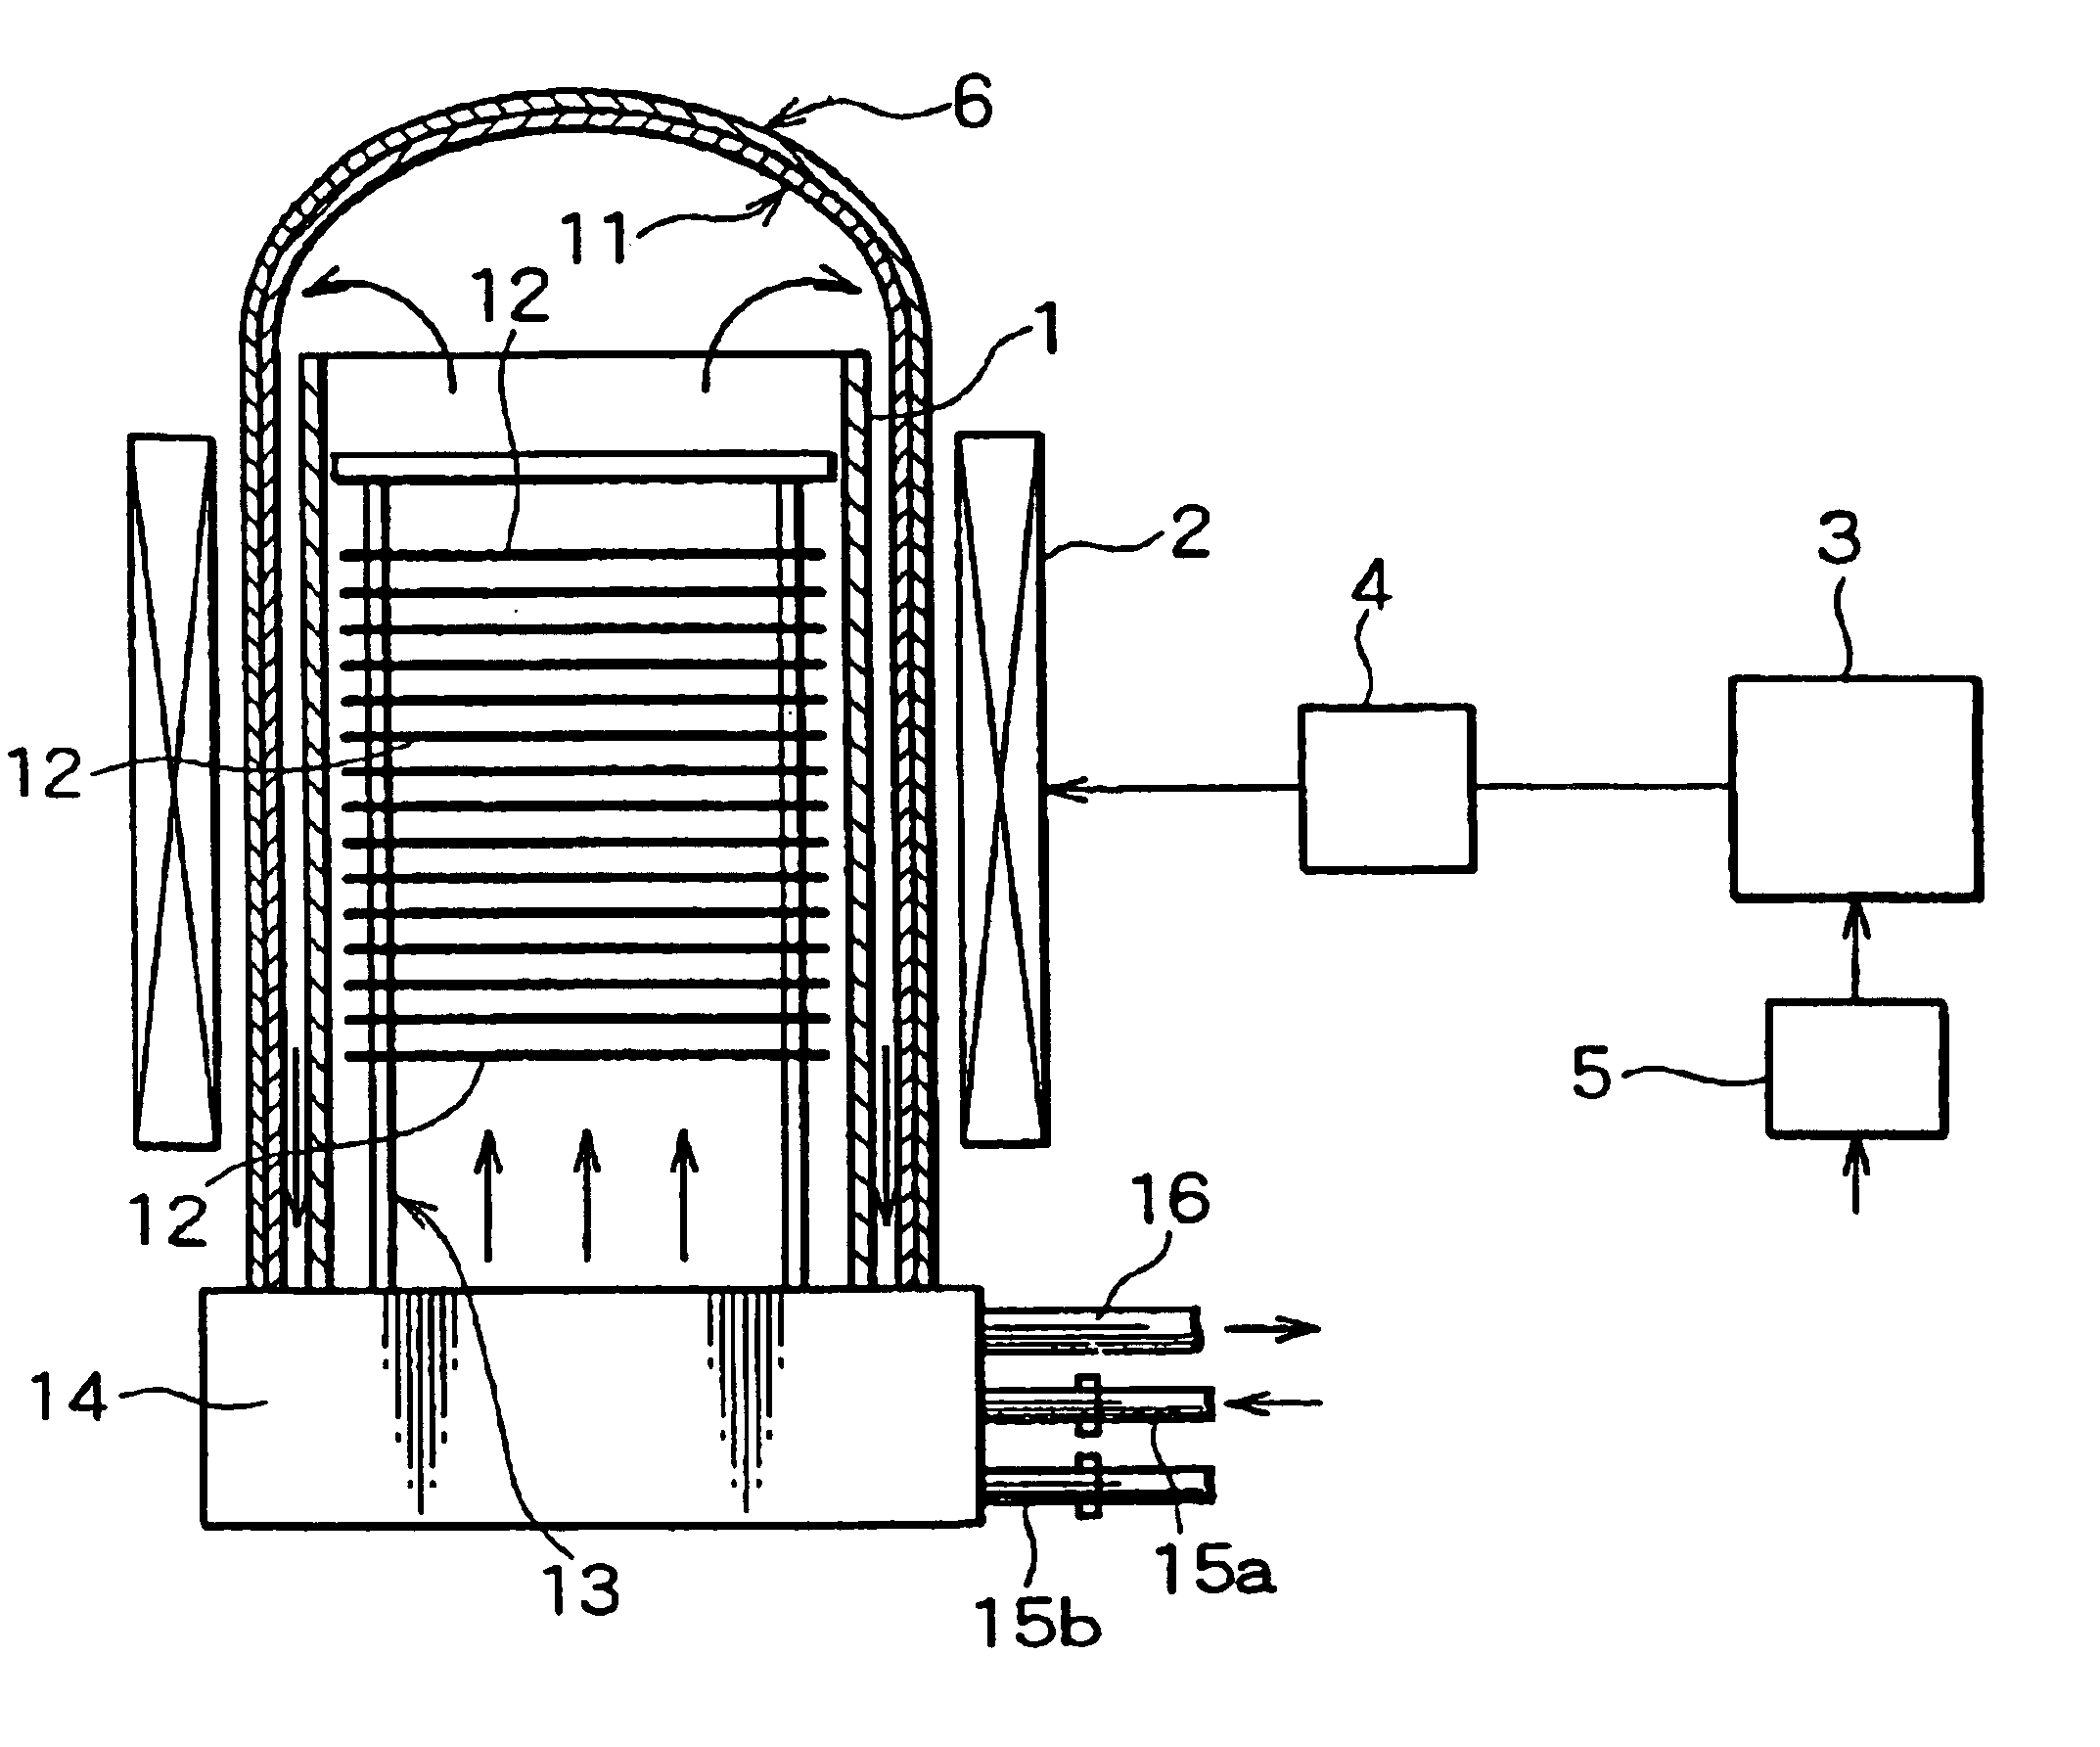 Heating apparatus using induction heating